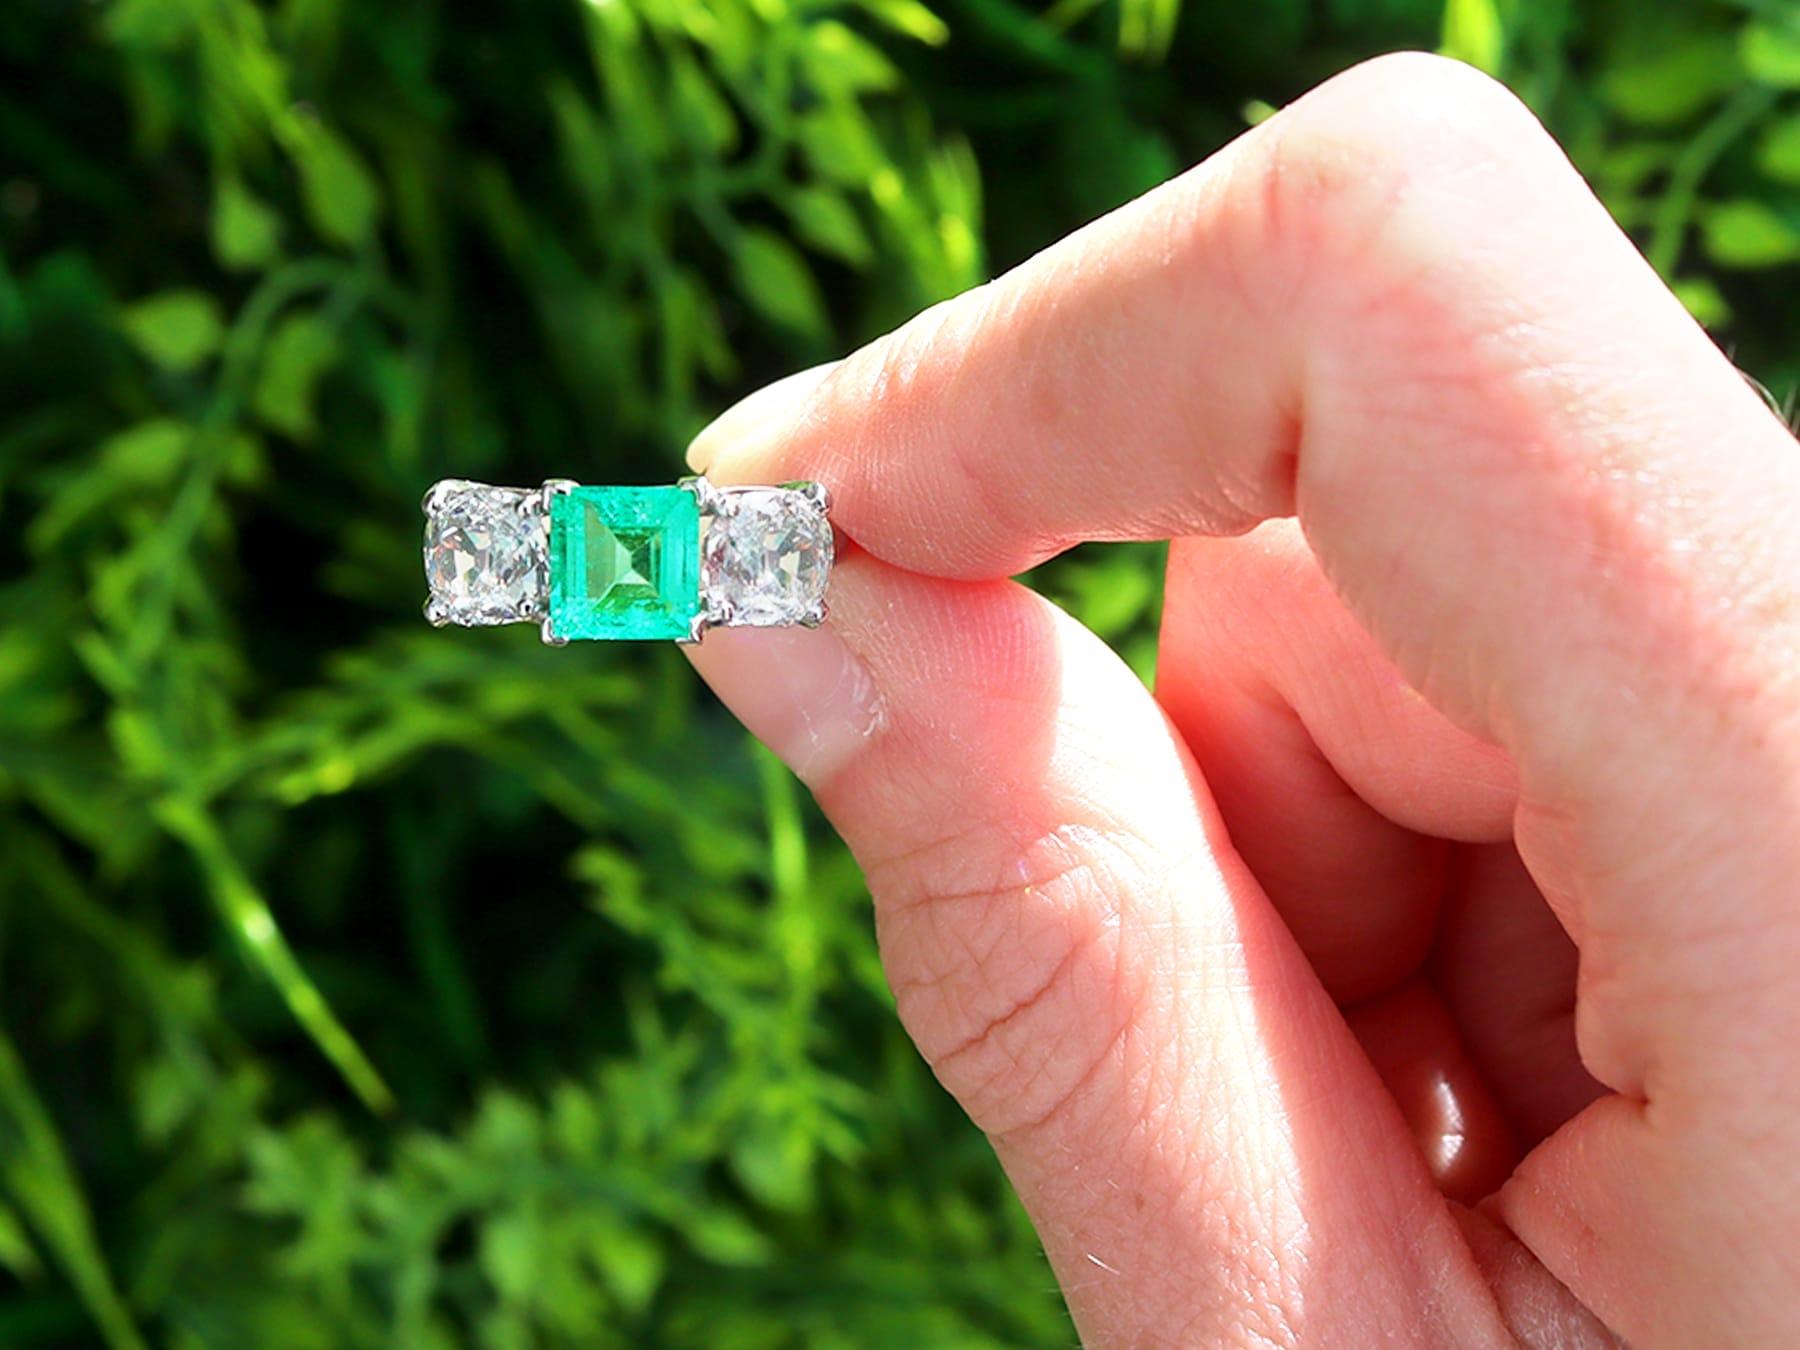 A stunning, fine and impressive antique 1.11 carat Colombian emerald and 1.33 carat diamond, platinum trilogy ring; part of our diverse engagement ring collections.

This stunning, fine and impressive antique emerald and diamond ring has been